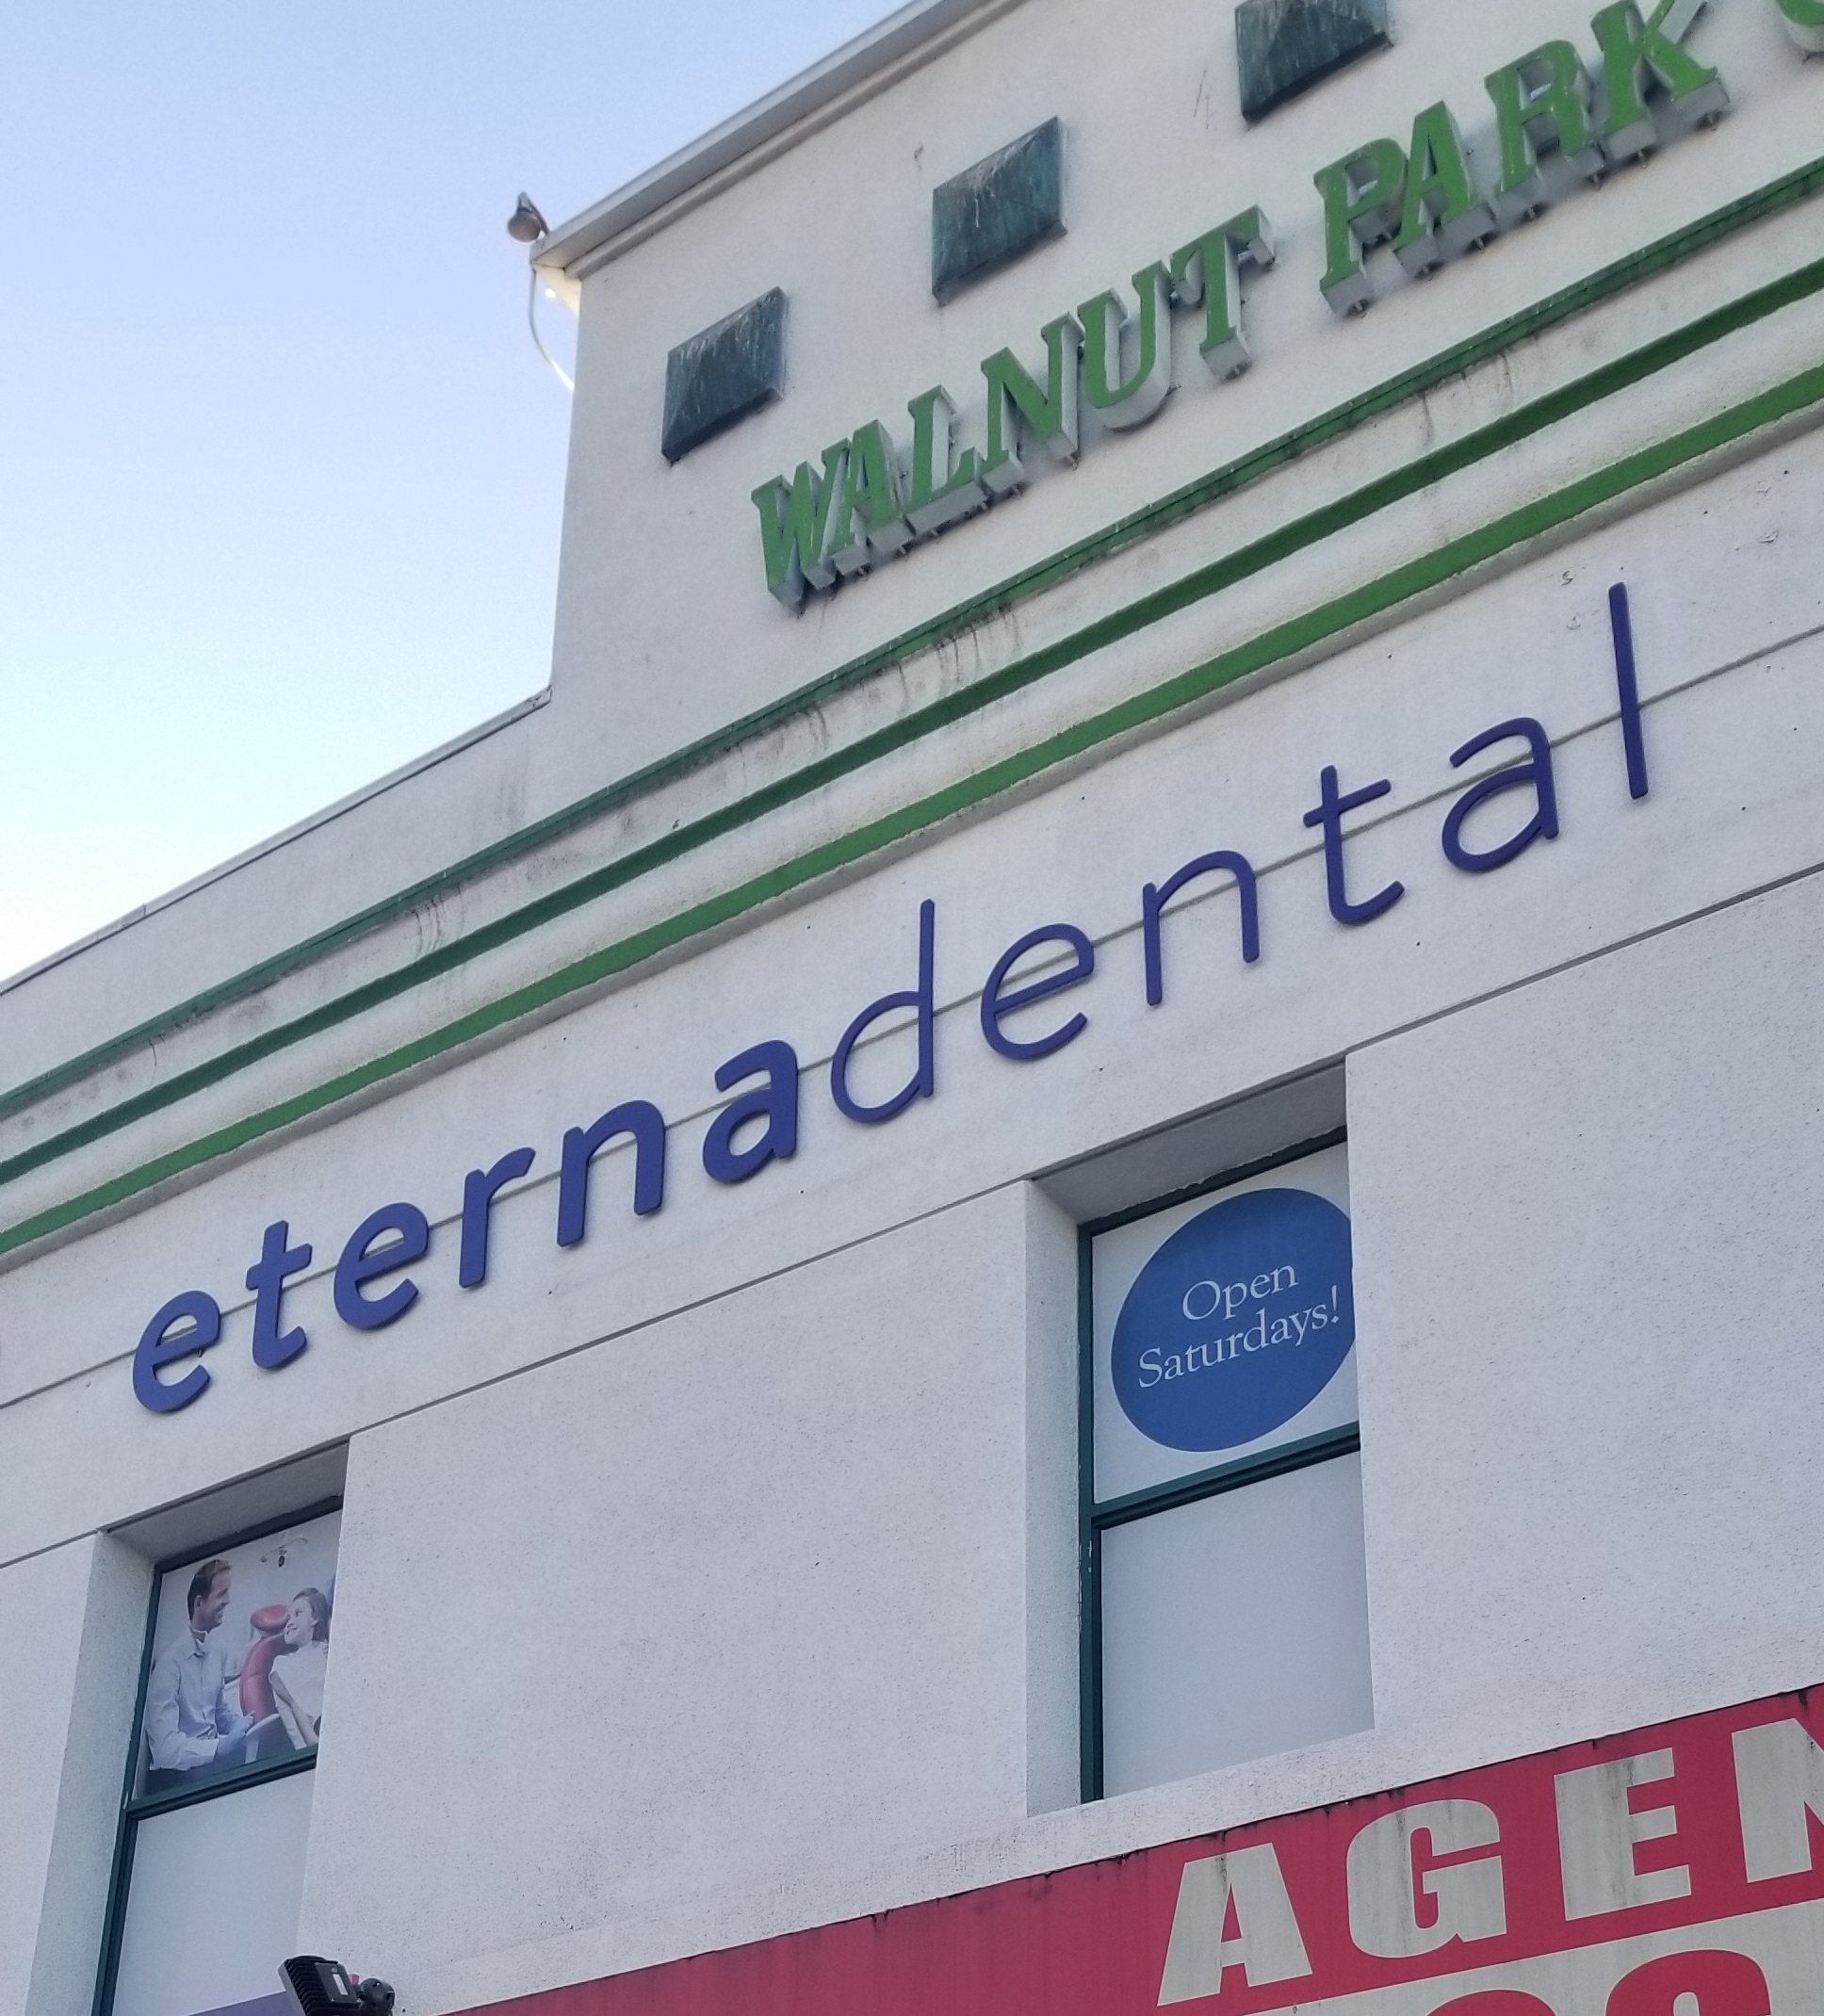 This clinic dimensional lettering is a real attention-grabbing sign for Eternadental as part of their business sign package.